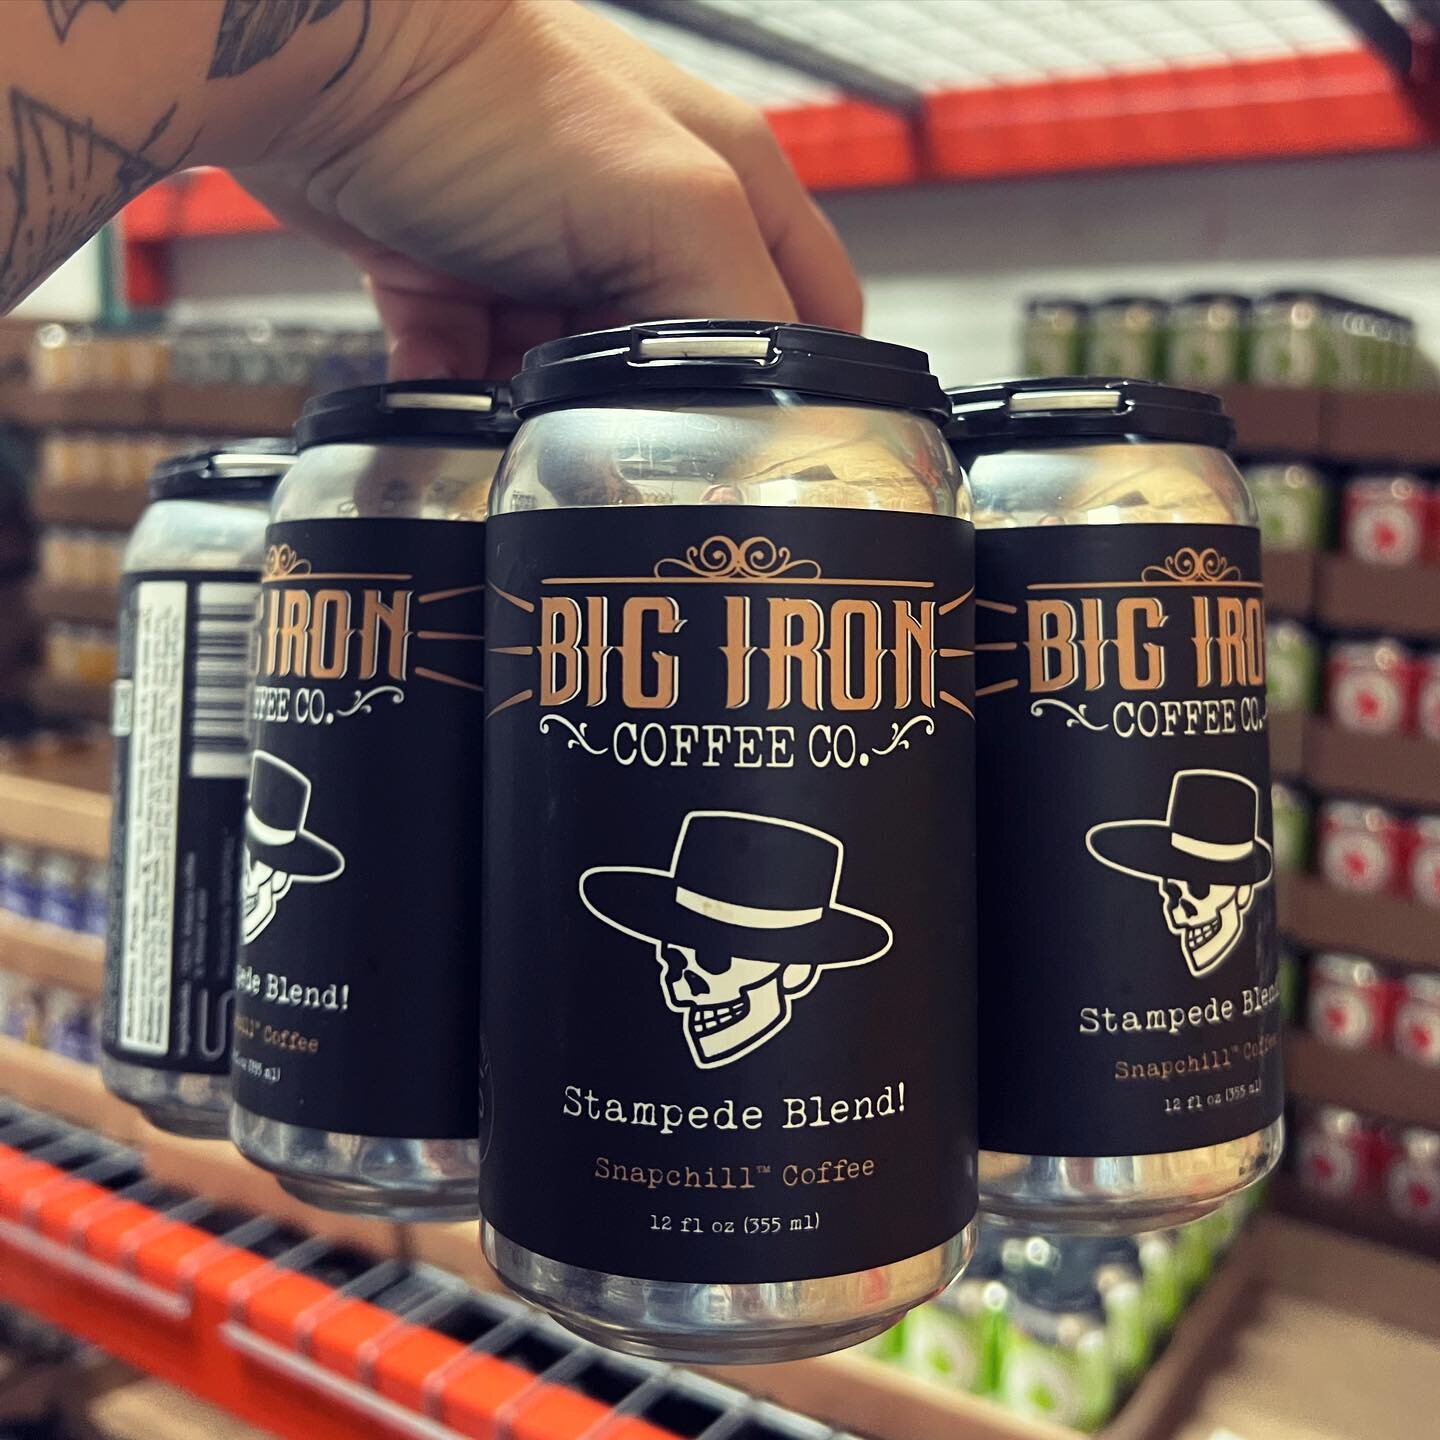 We now have @bigironcoffee cans for sale! We are super stoked to have this local favorite as a new addition to our non-alc menu. 

#stormpeakbrewing #steamboatsprings #colorado #craftbeer #coffee #localcoffee #coffeeroaster #nonalcoholic #drinktheboa